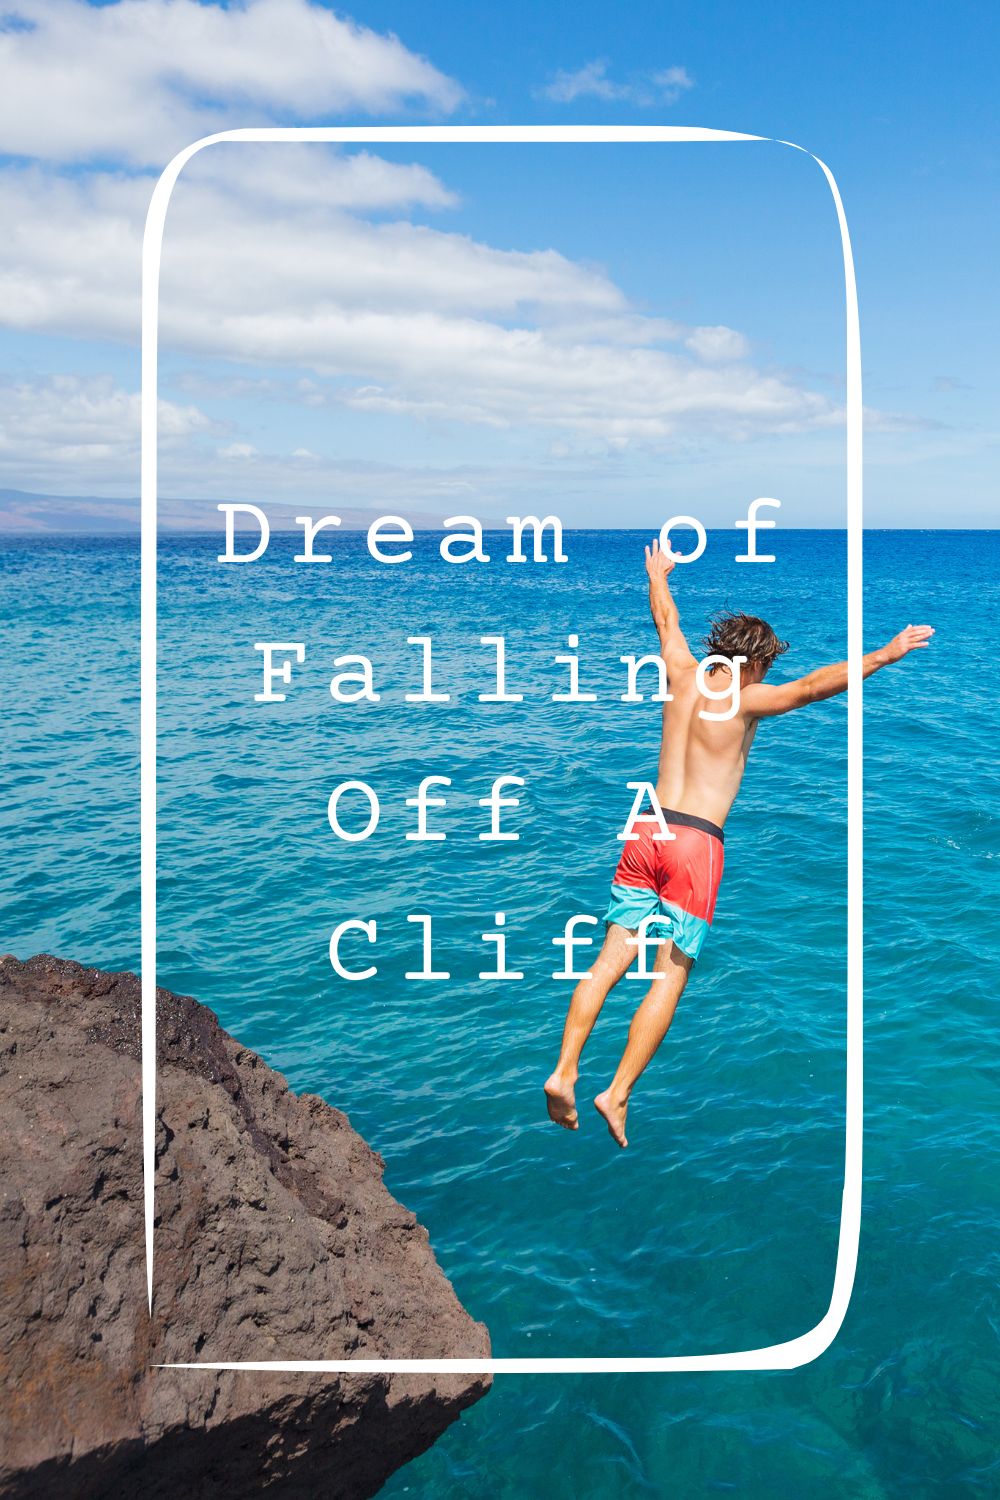 Dream of Falling Off A Cliff4